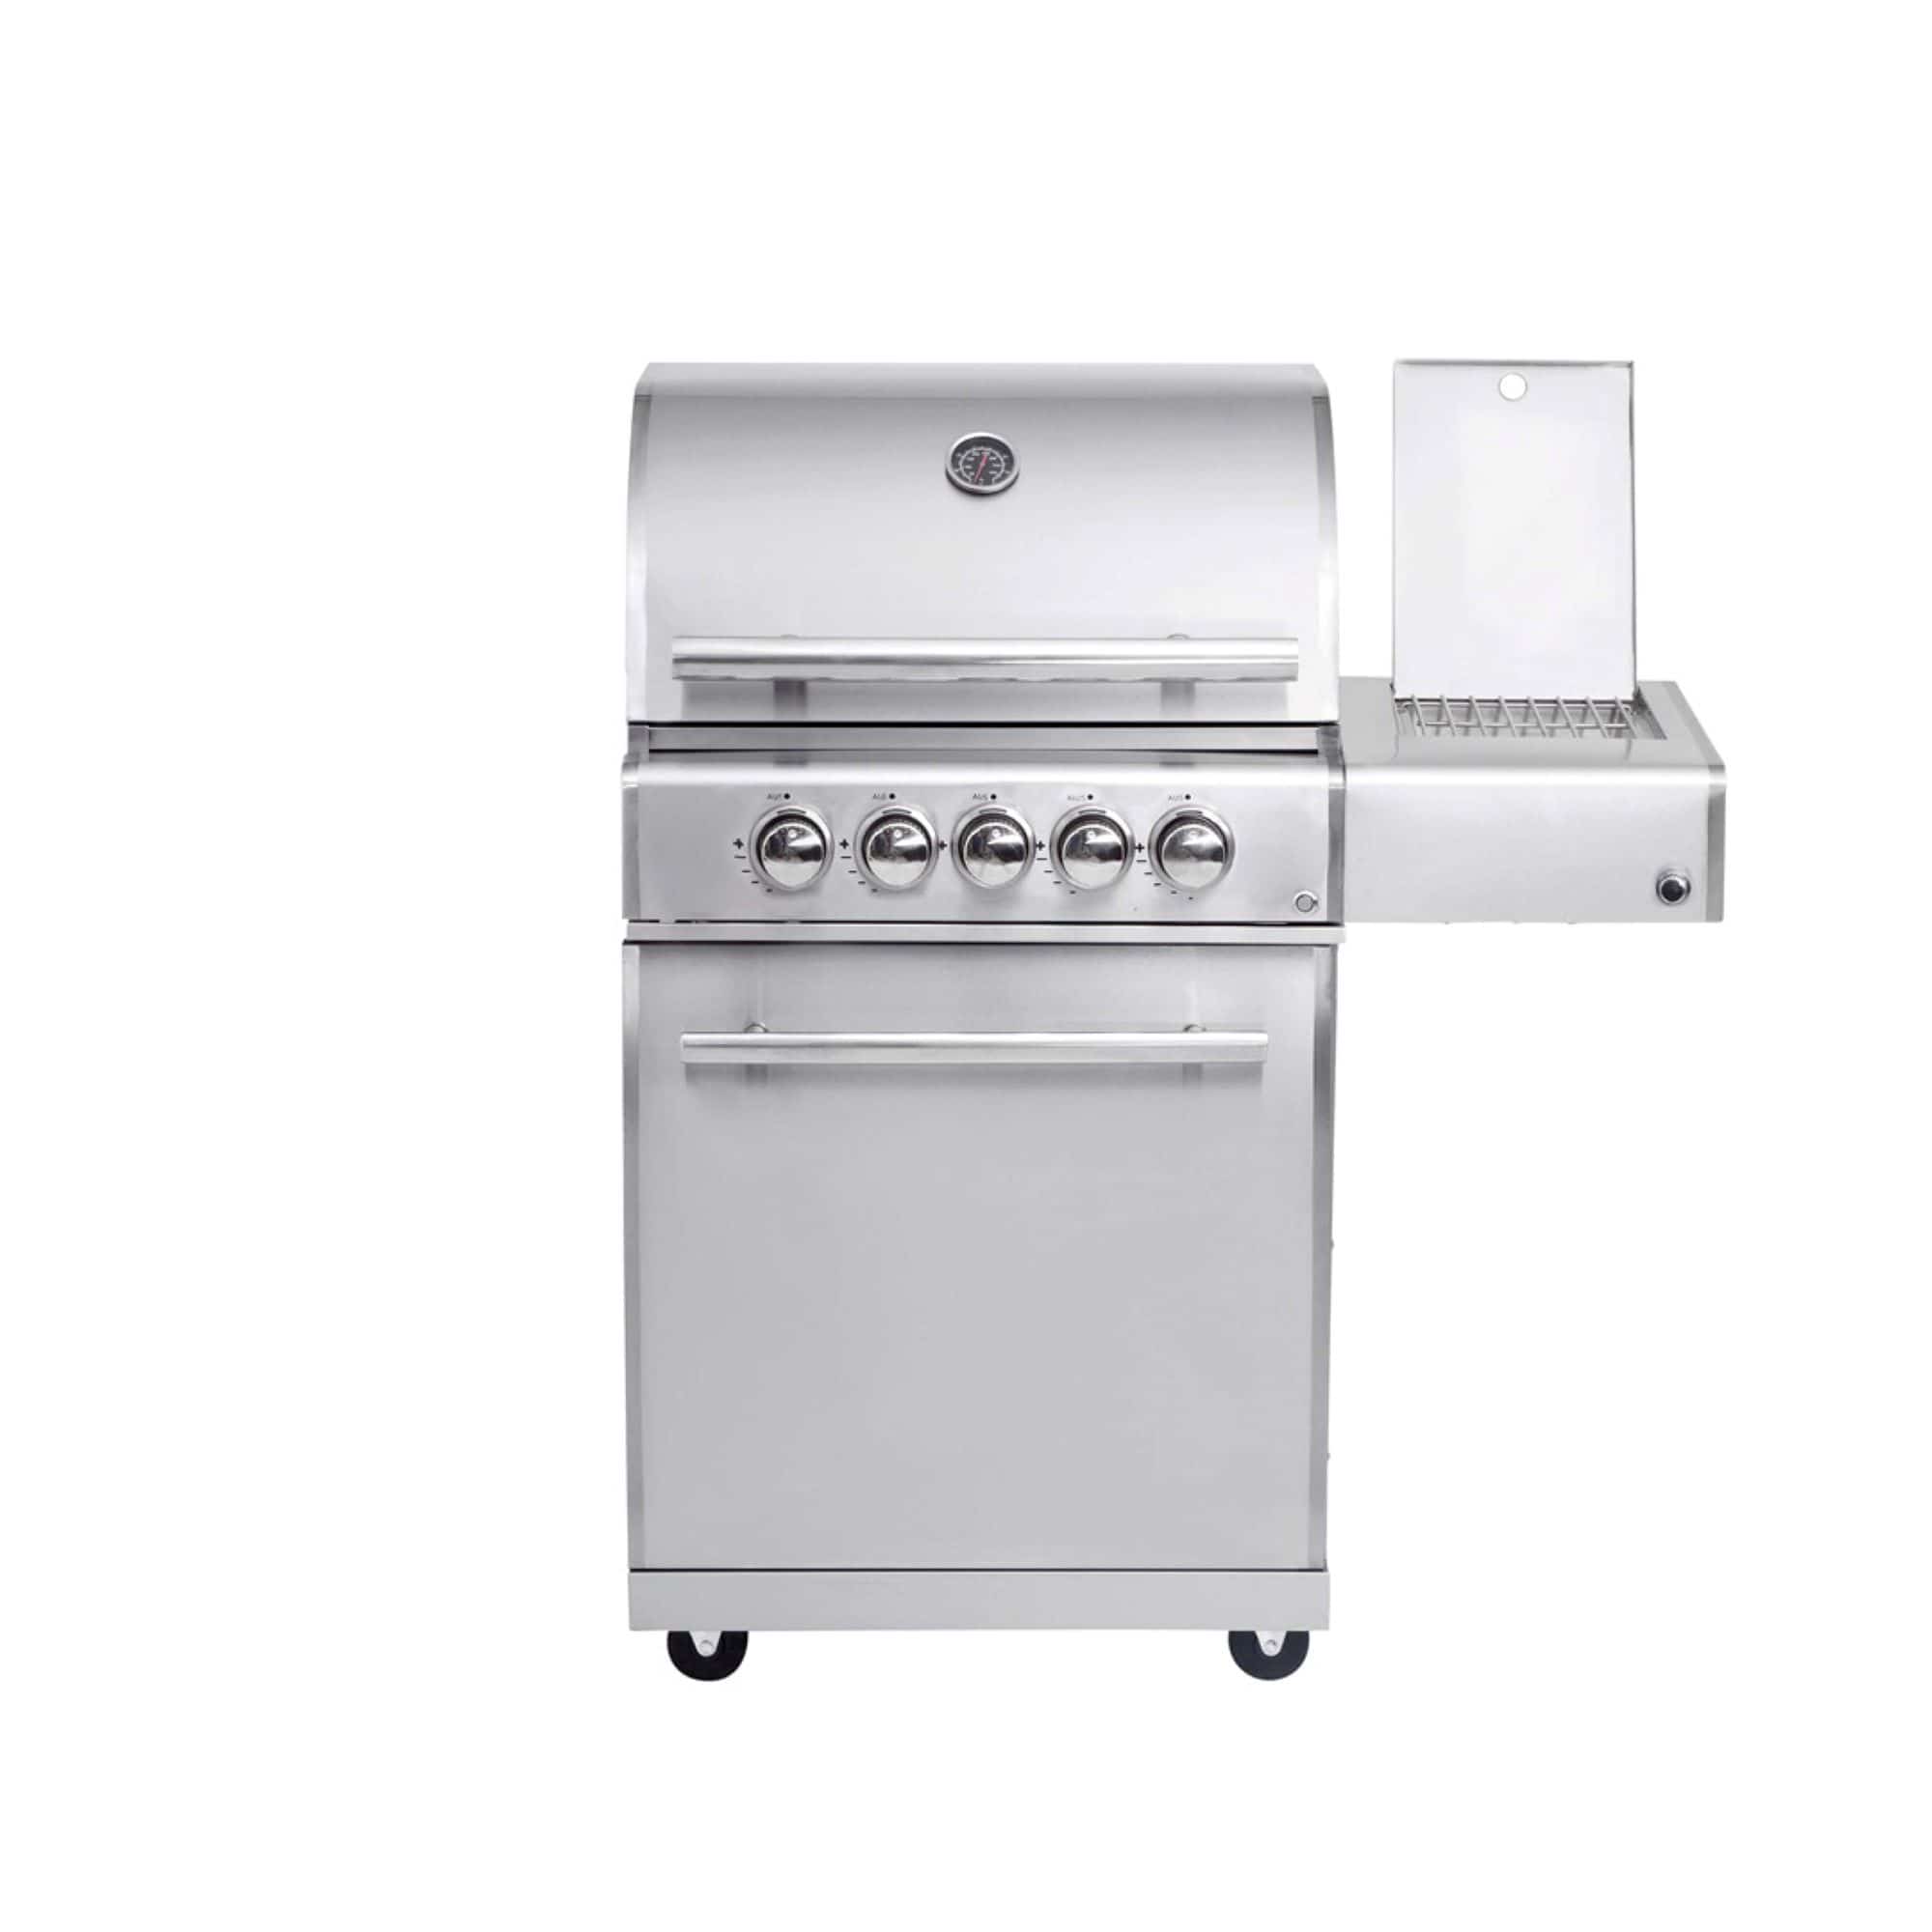 MODULAR-TOP-LINE-ALL'GRILL CHEF M